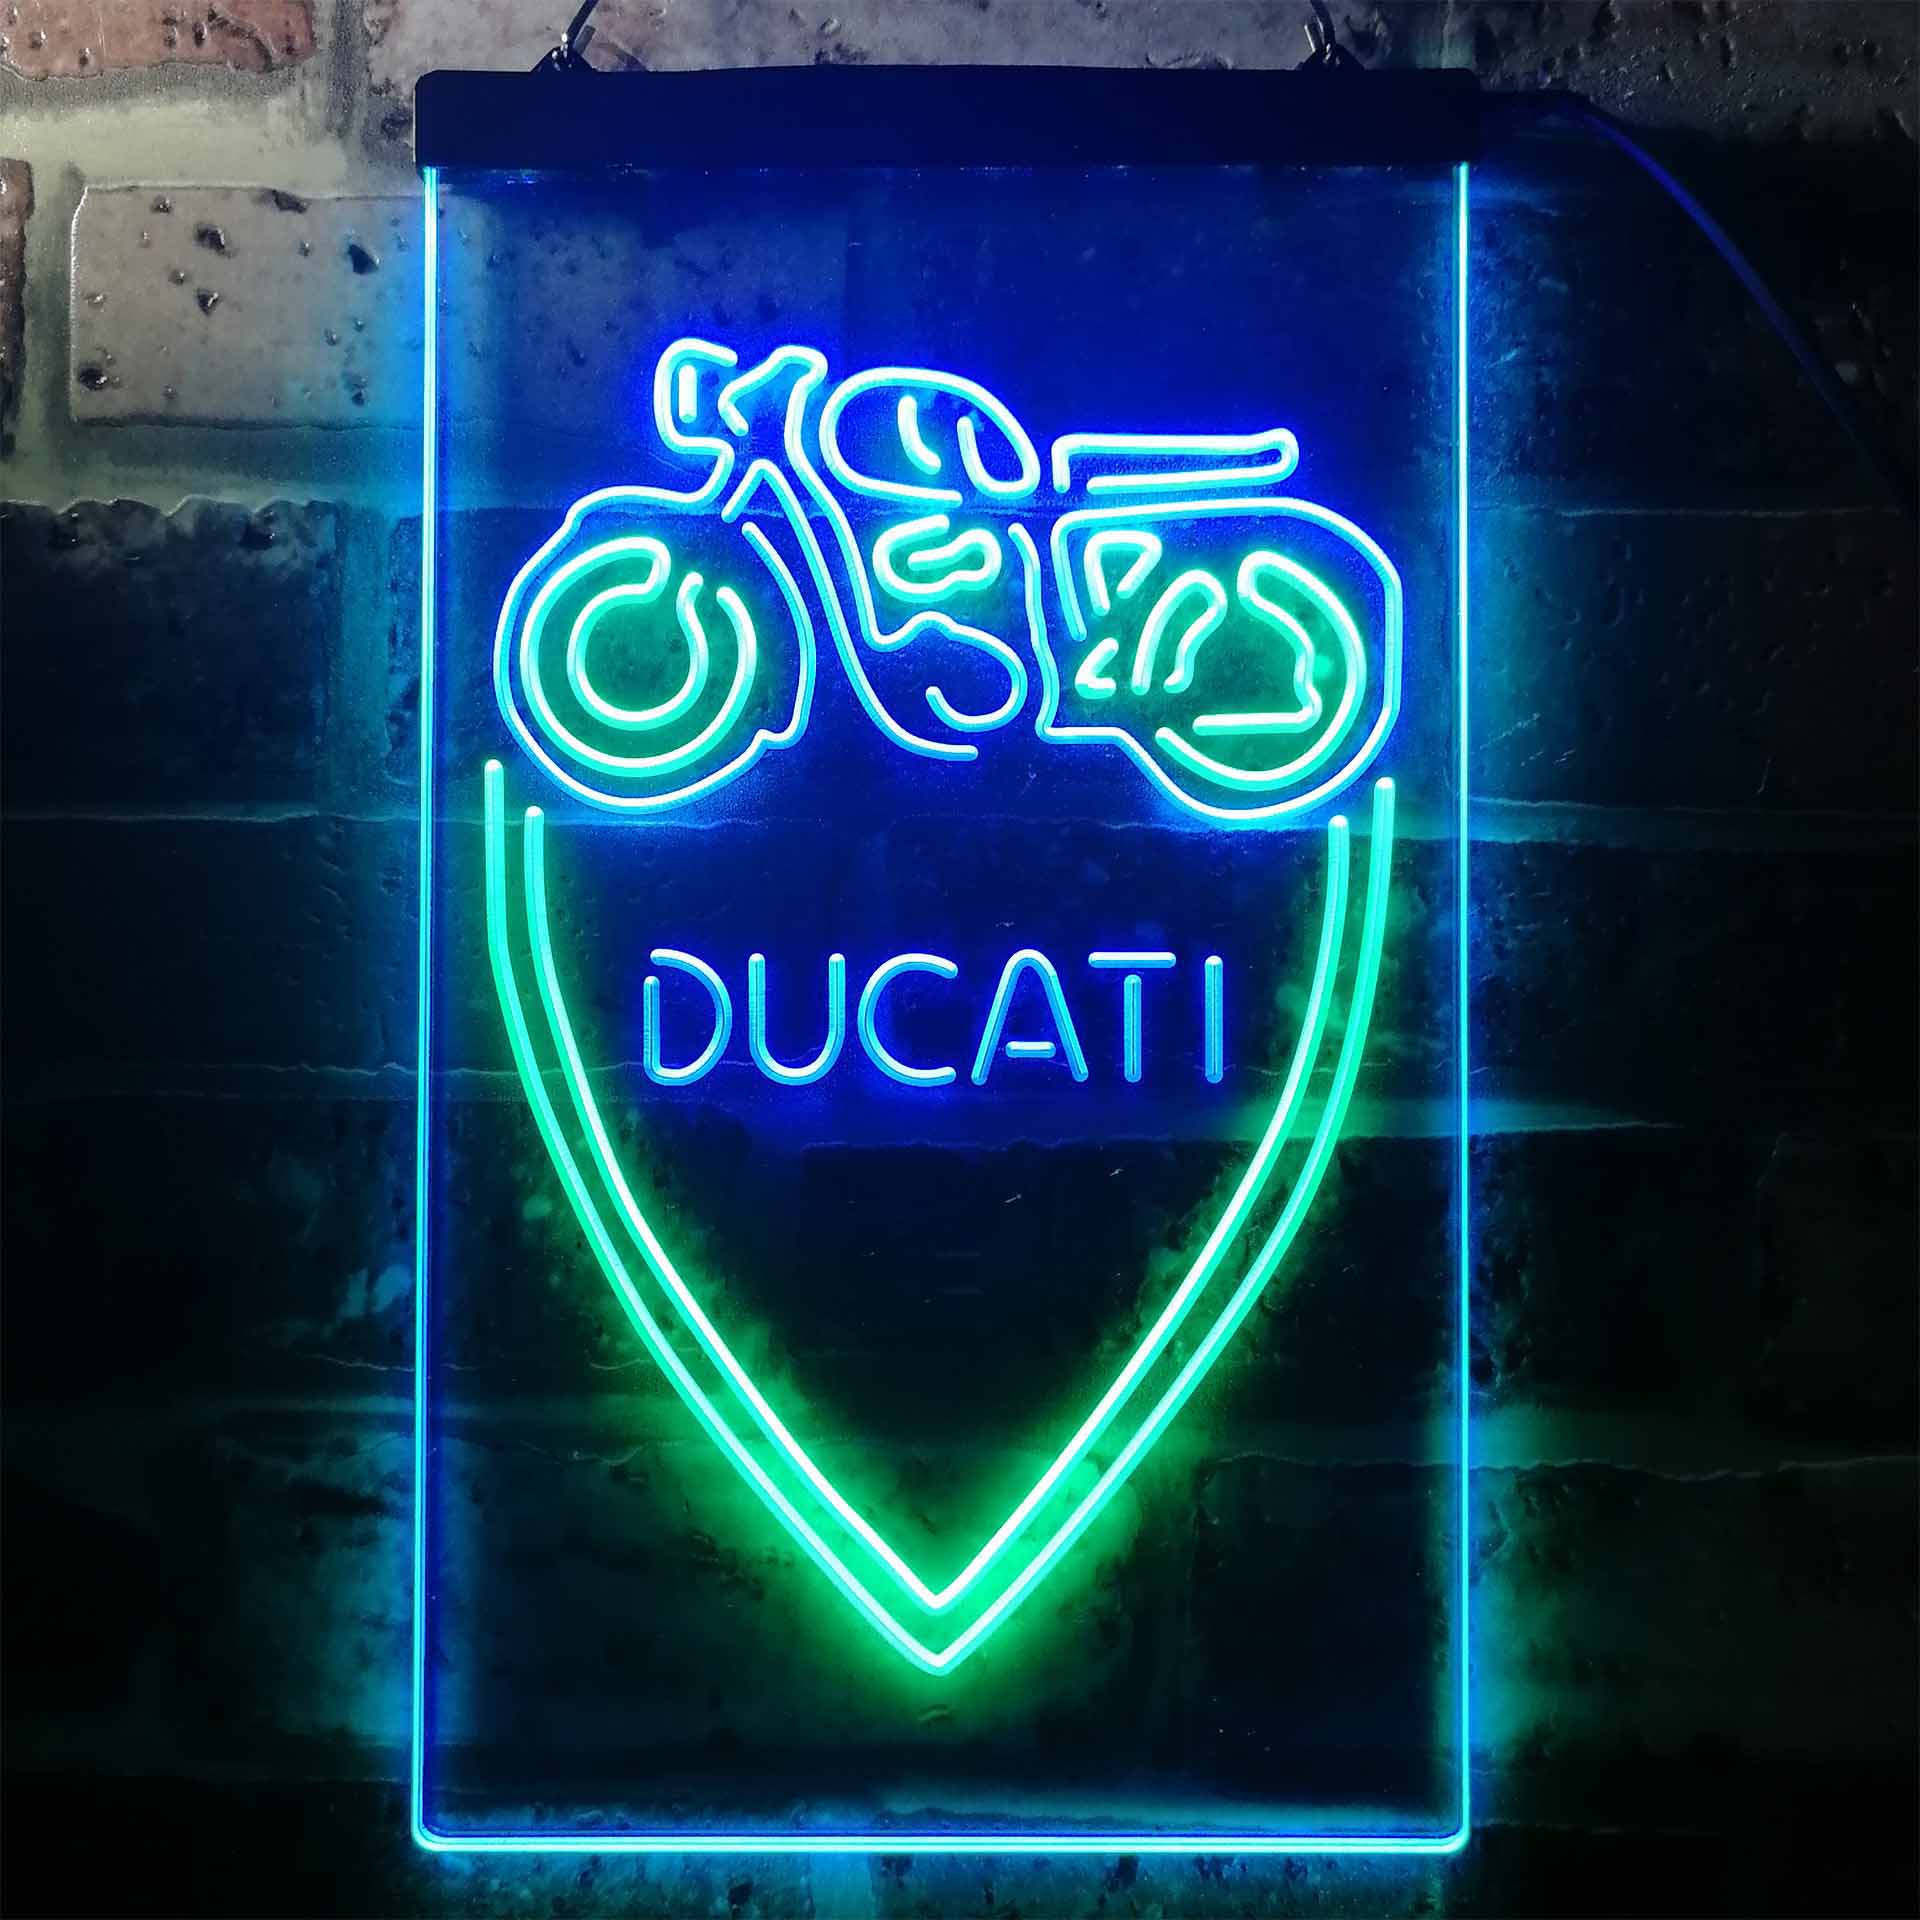 Ducati Motorcycle Club LED Neon Sign